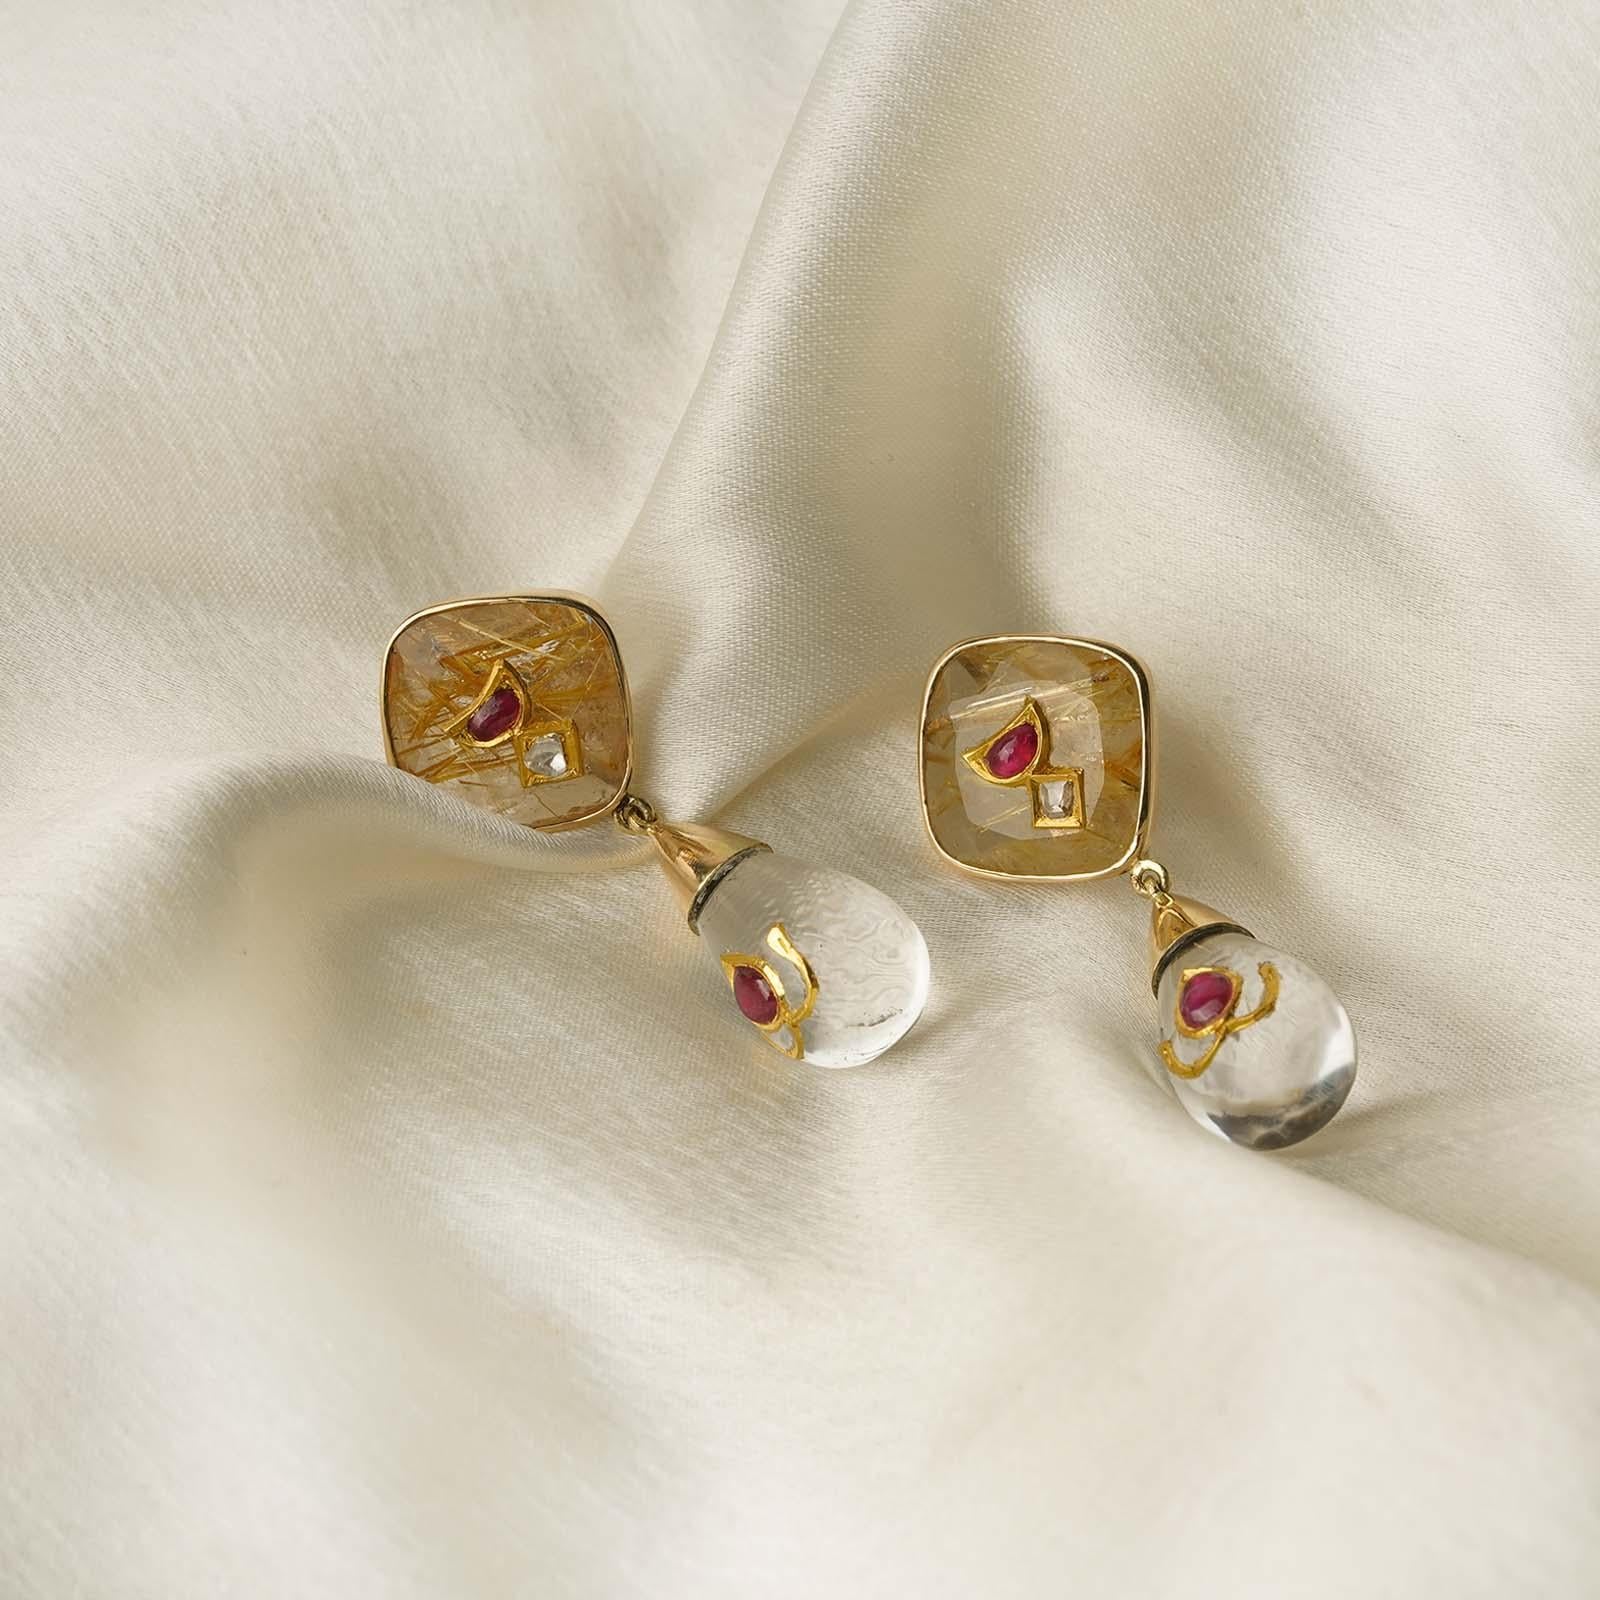 Gold(22K): 1.03g
Gold(14K): 4.79g
Uncut Diamonds/Vilandi/Polki: 0.12ct
Gemstones: Ruby, Rutile Quartz, Natural Crystal

Our unmistakable identity, our signature use of artisanal skills that come into play when working with authentic techniques is